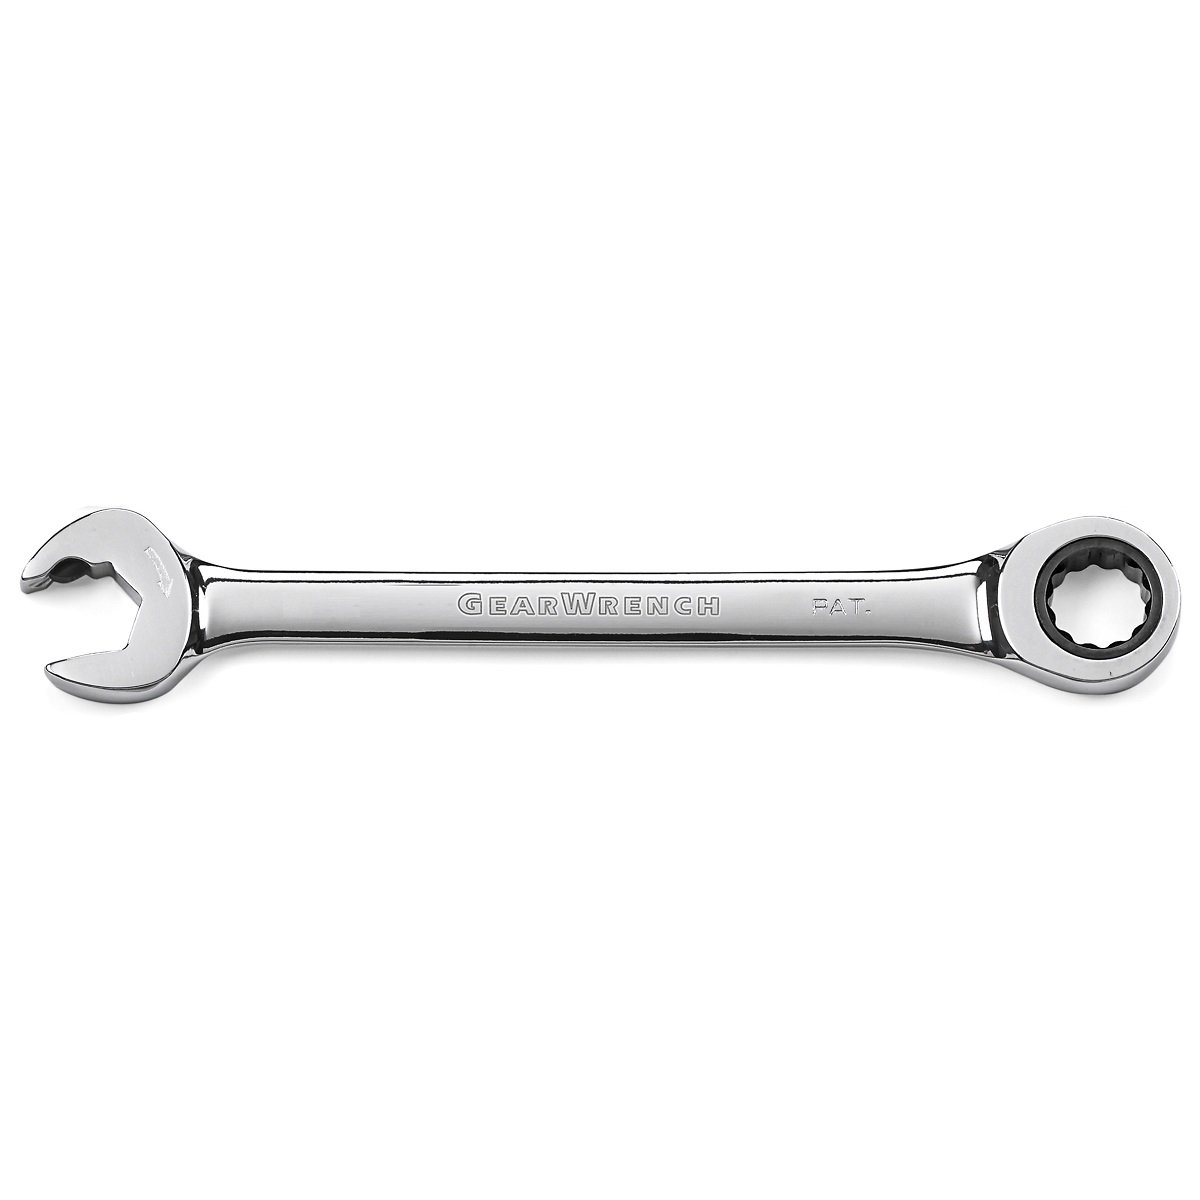 GearWrench Ratcheting Open End Combination Spanner Wrench 10mm 85510